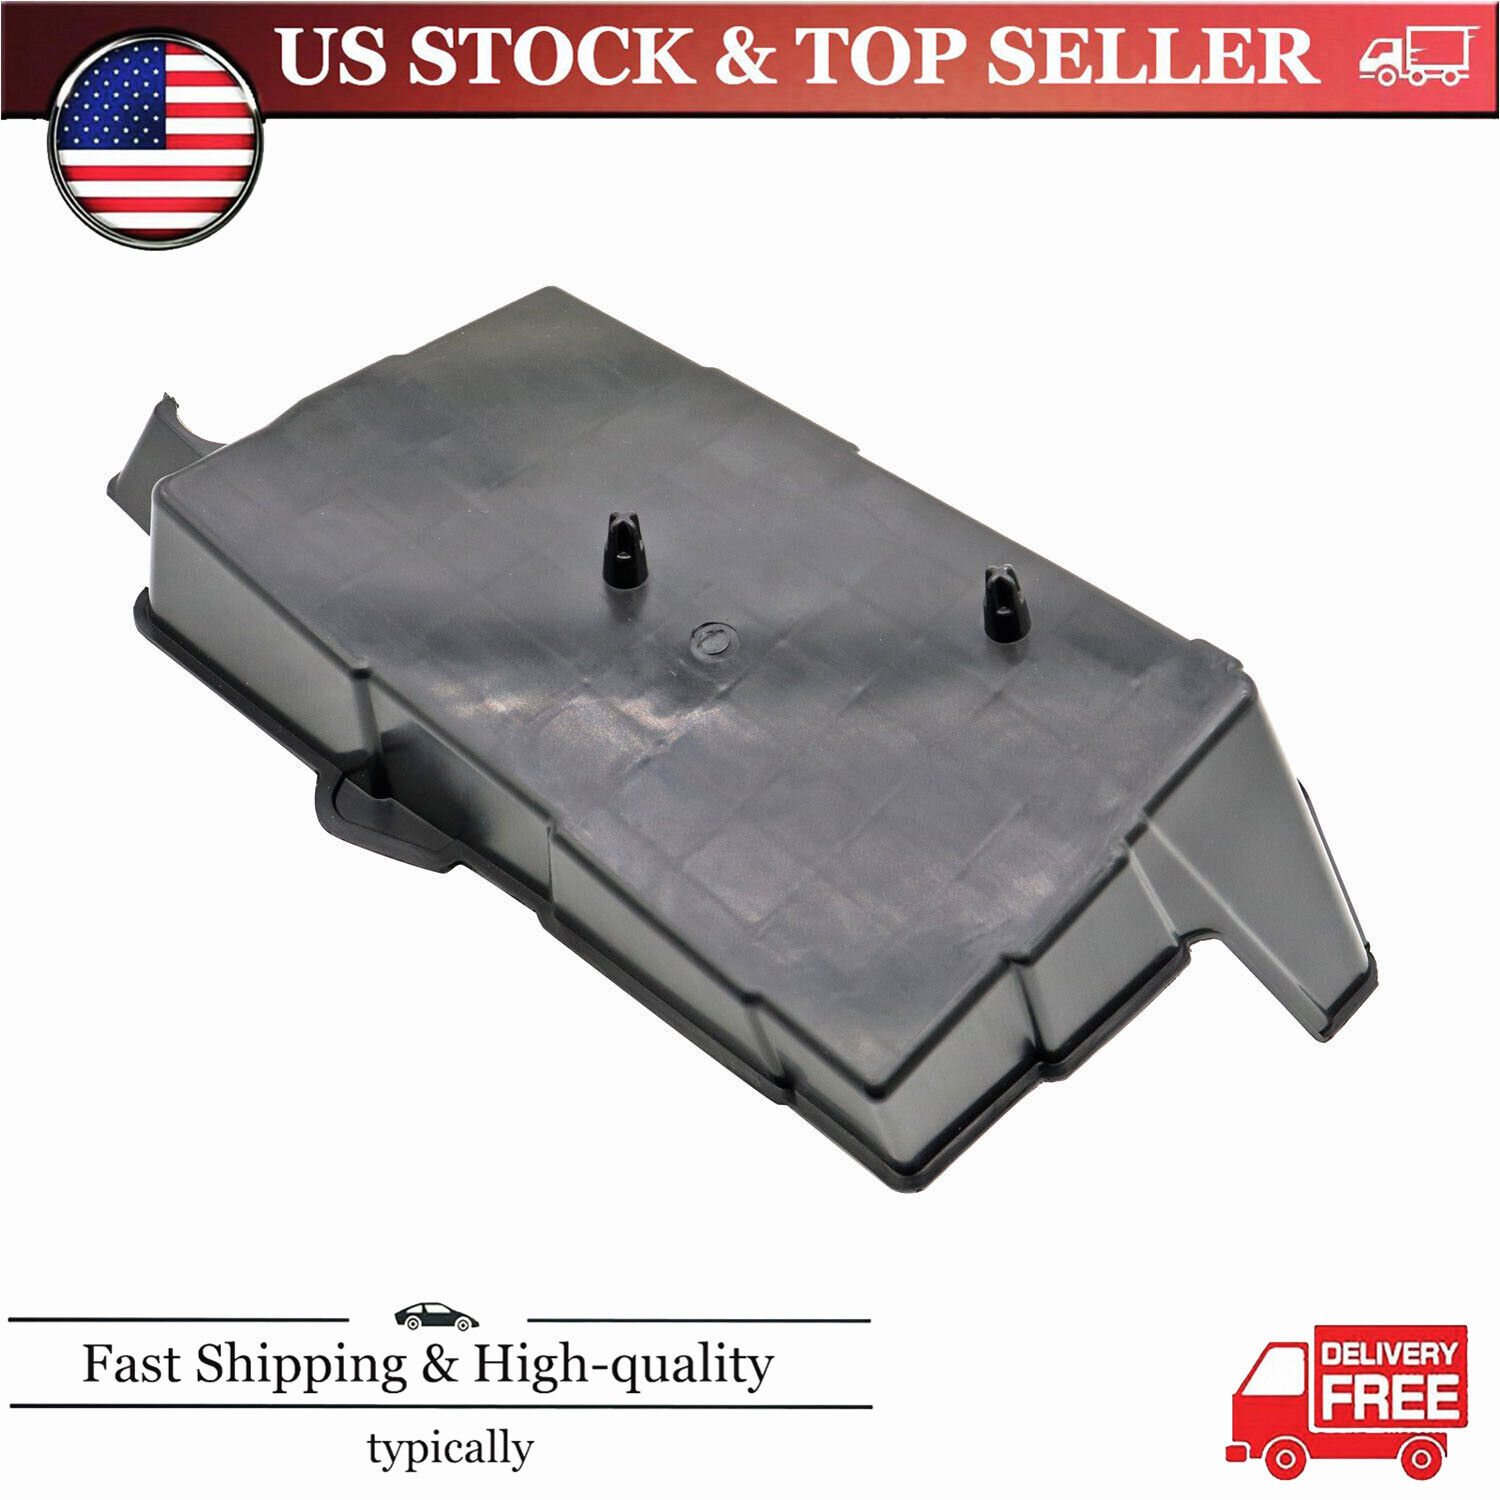 Pack of 1 fit for Honda HR-V 2016-2020 Battery Tray No.31521-T5A-000